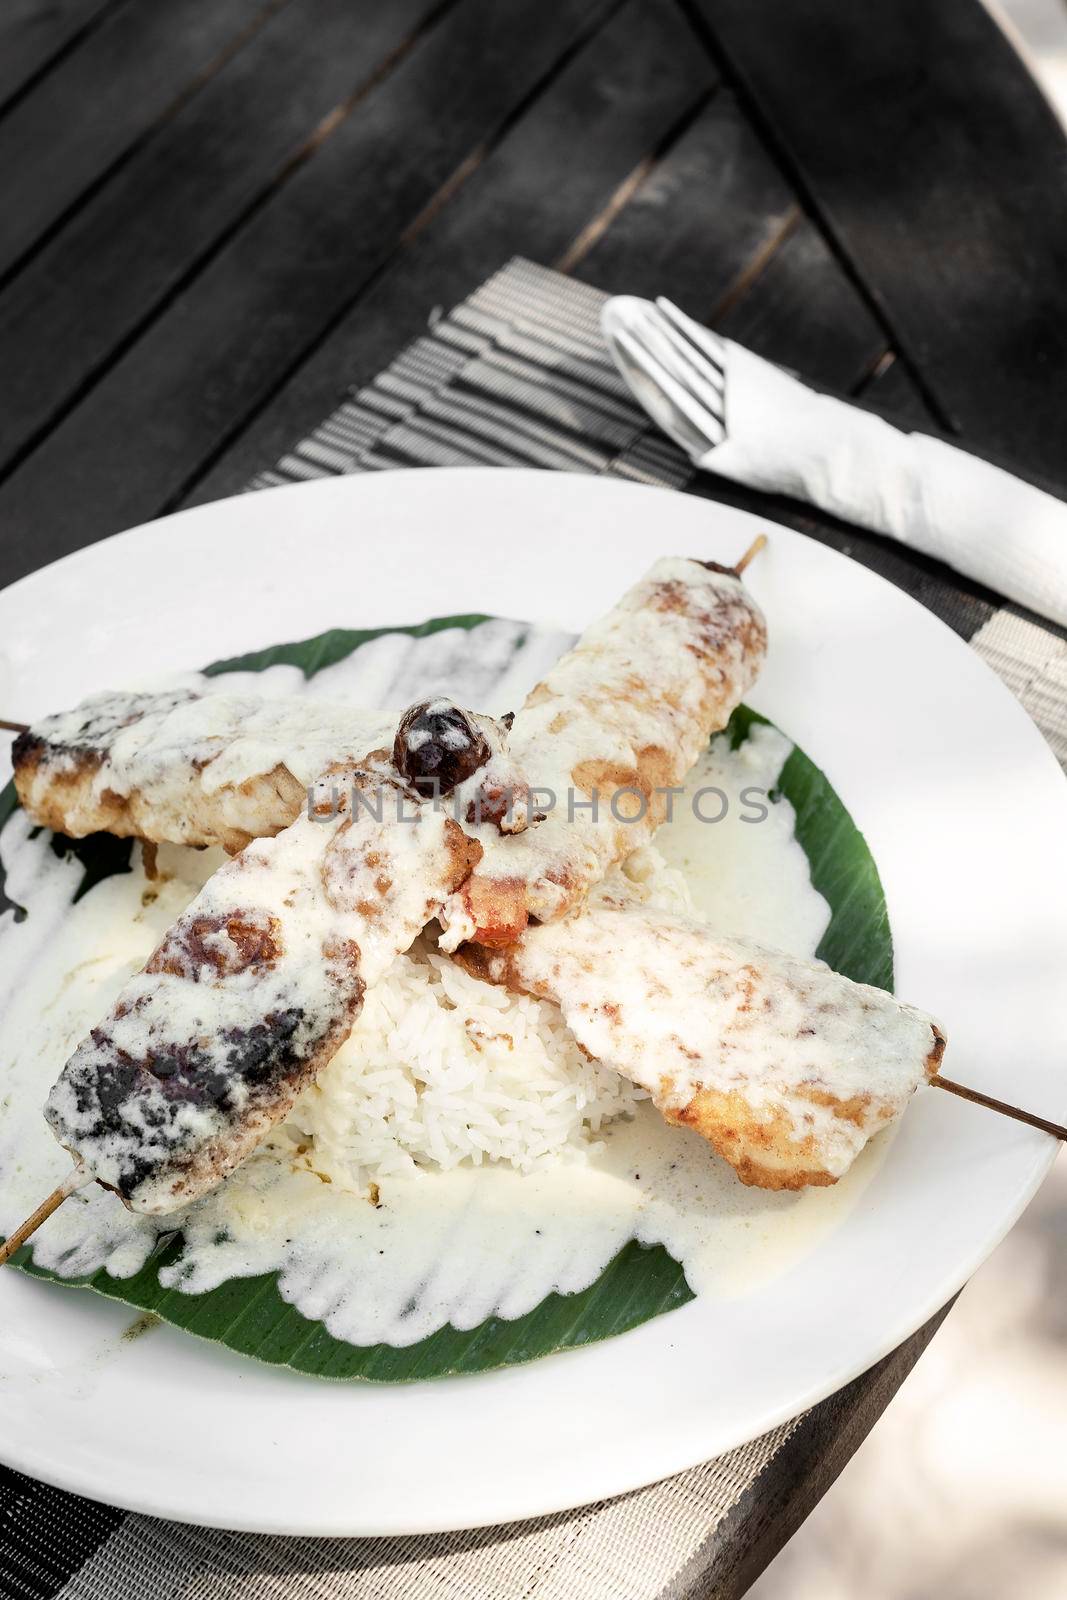 fish skewers with creamy coconut sauce and rice in vietnam by jackmalipan